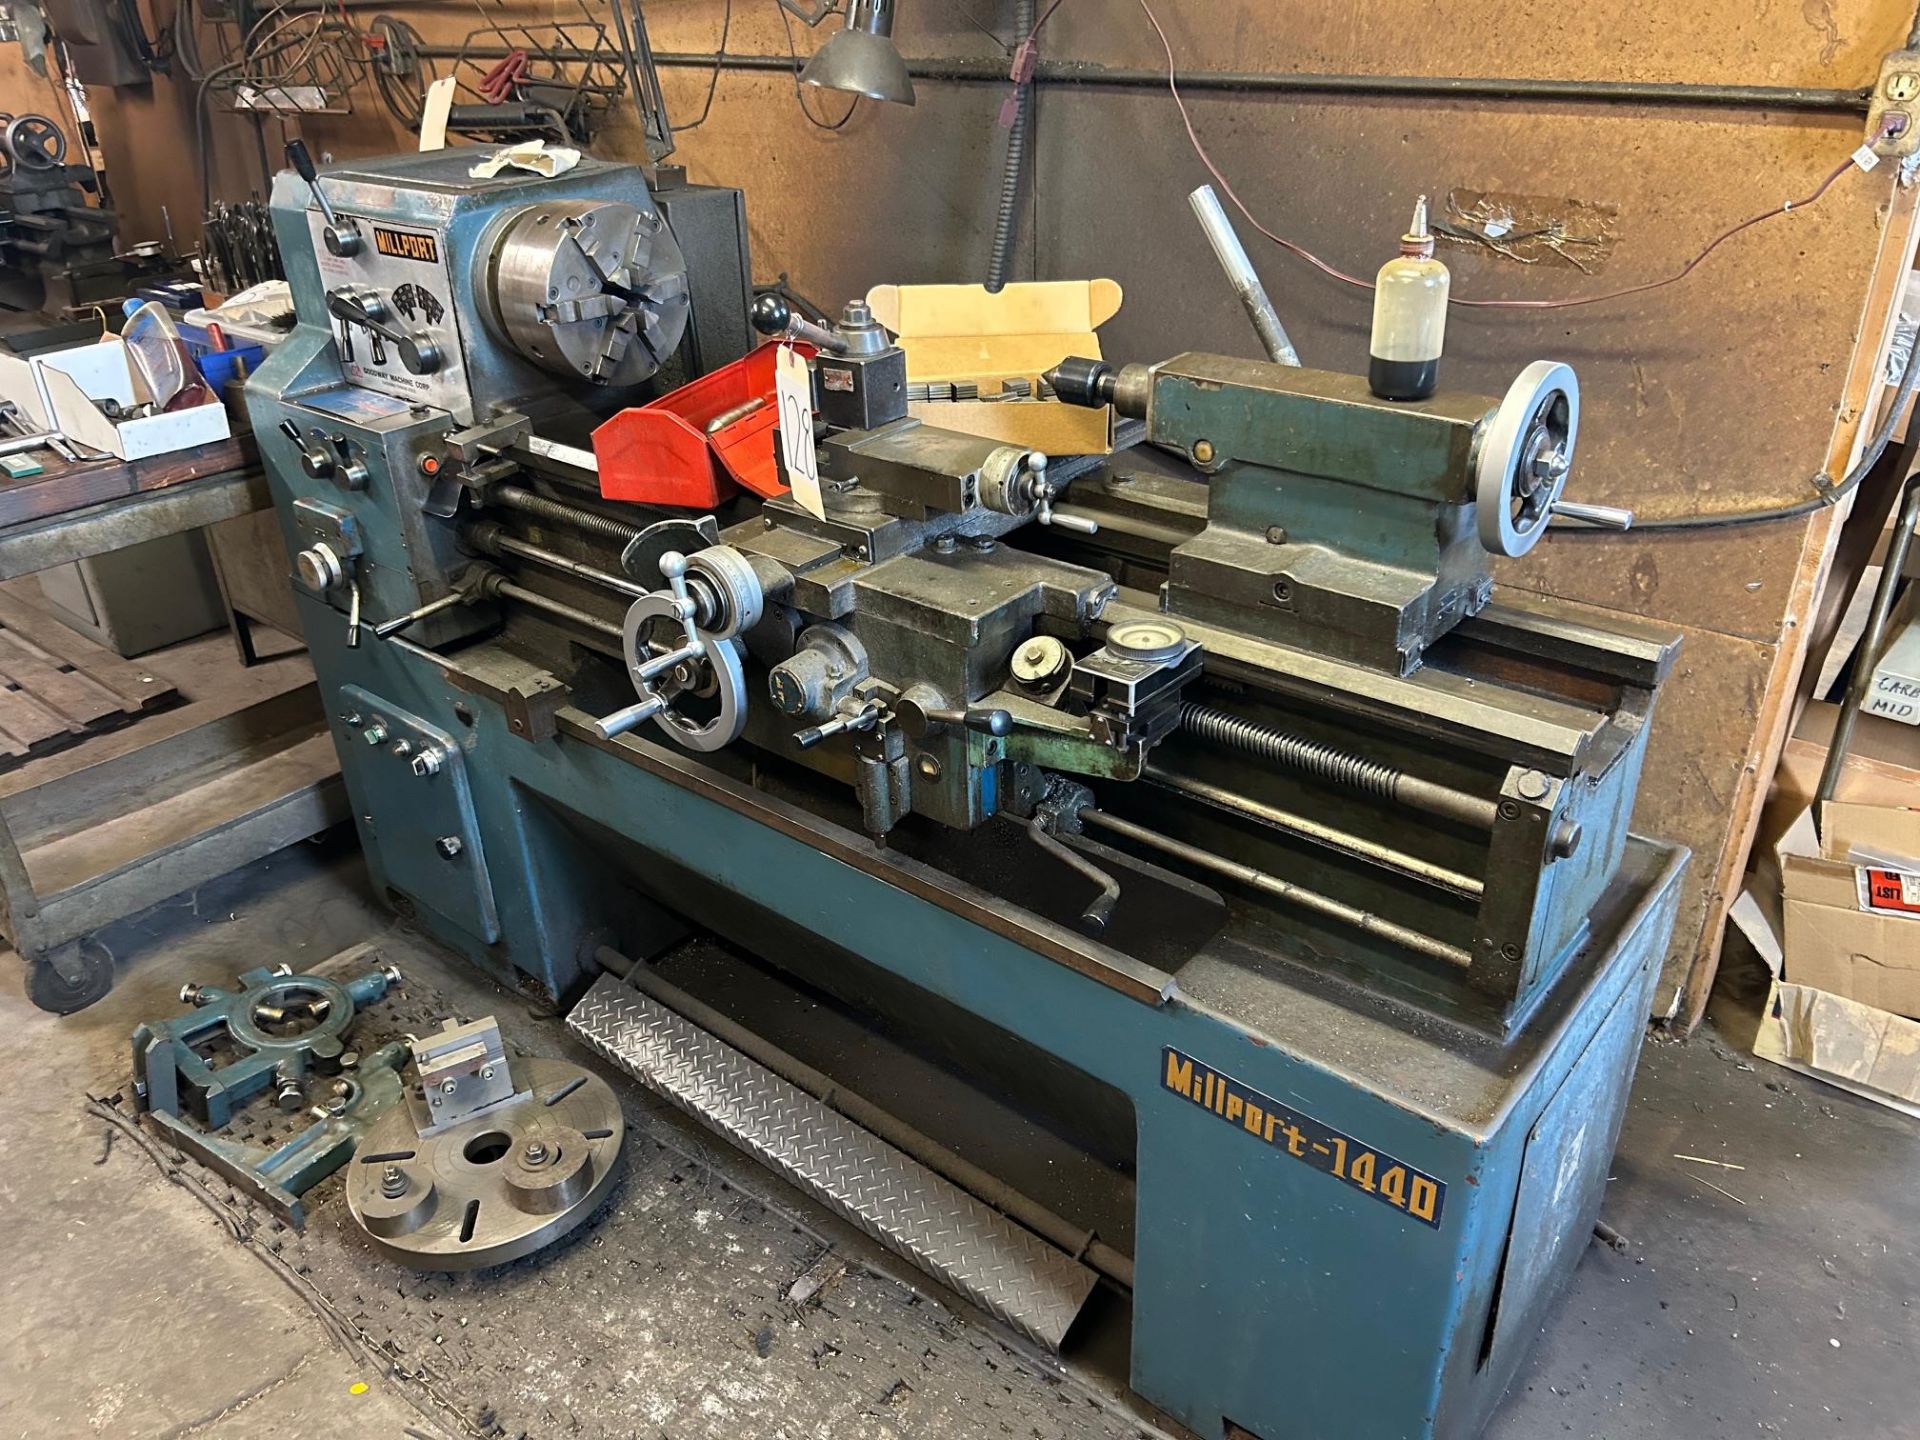 Millport Tool Room Lathe, Model: 1140, includes: Steady Rest, Face Plate - Image 2 of 11